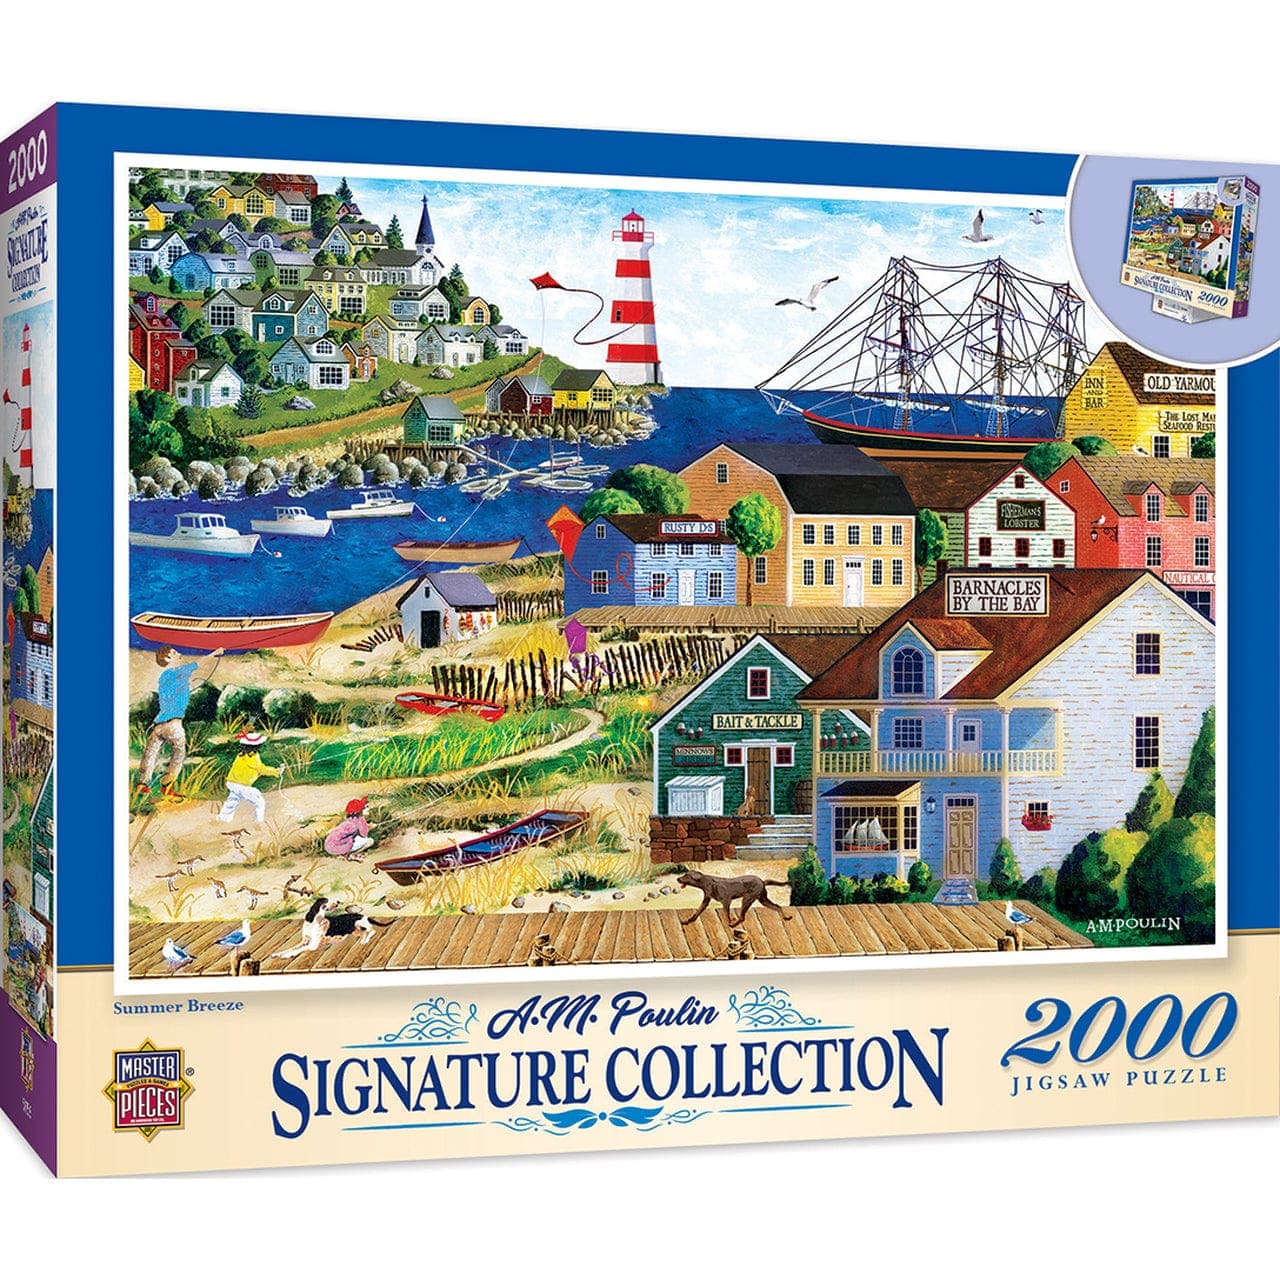 MasterPieces-Signature Collection - Summer Breeze - 2000 Piece Puzzle-72135-Legacy Toys